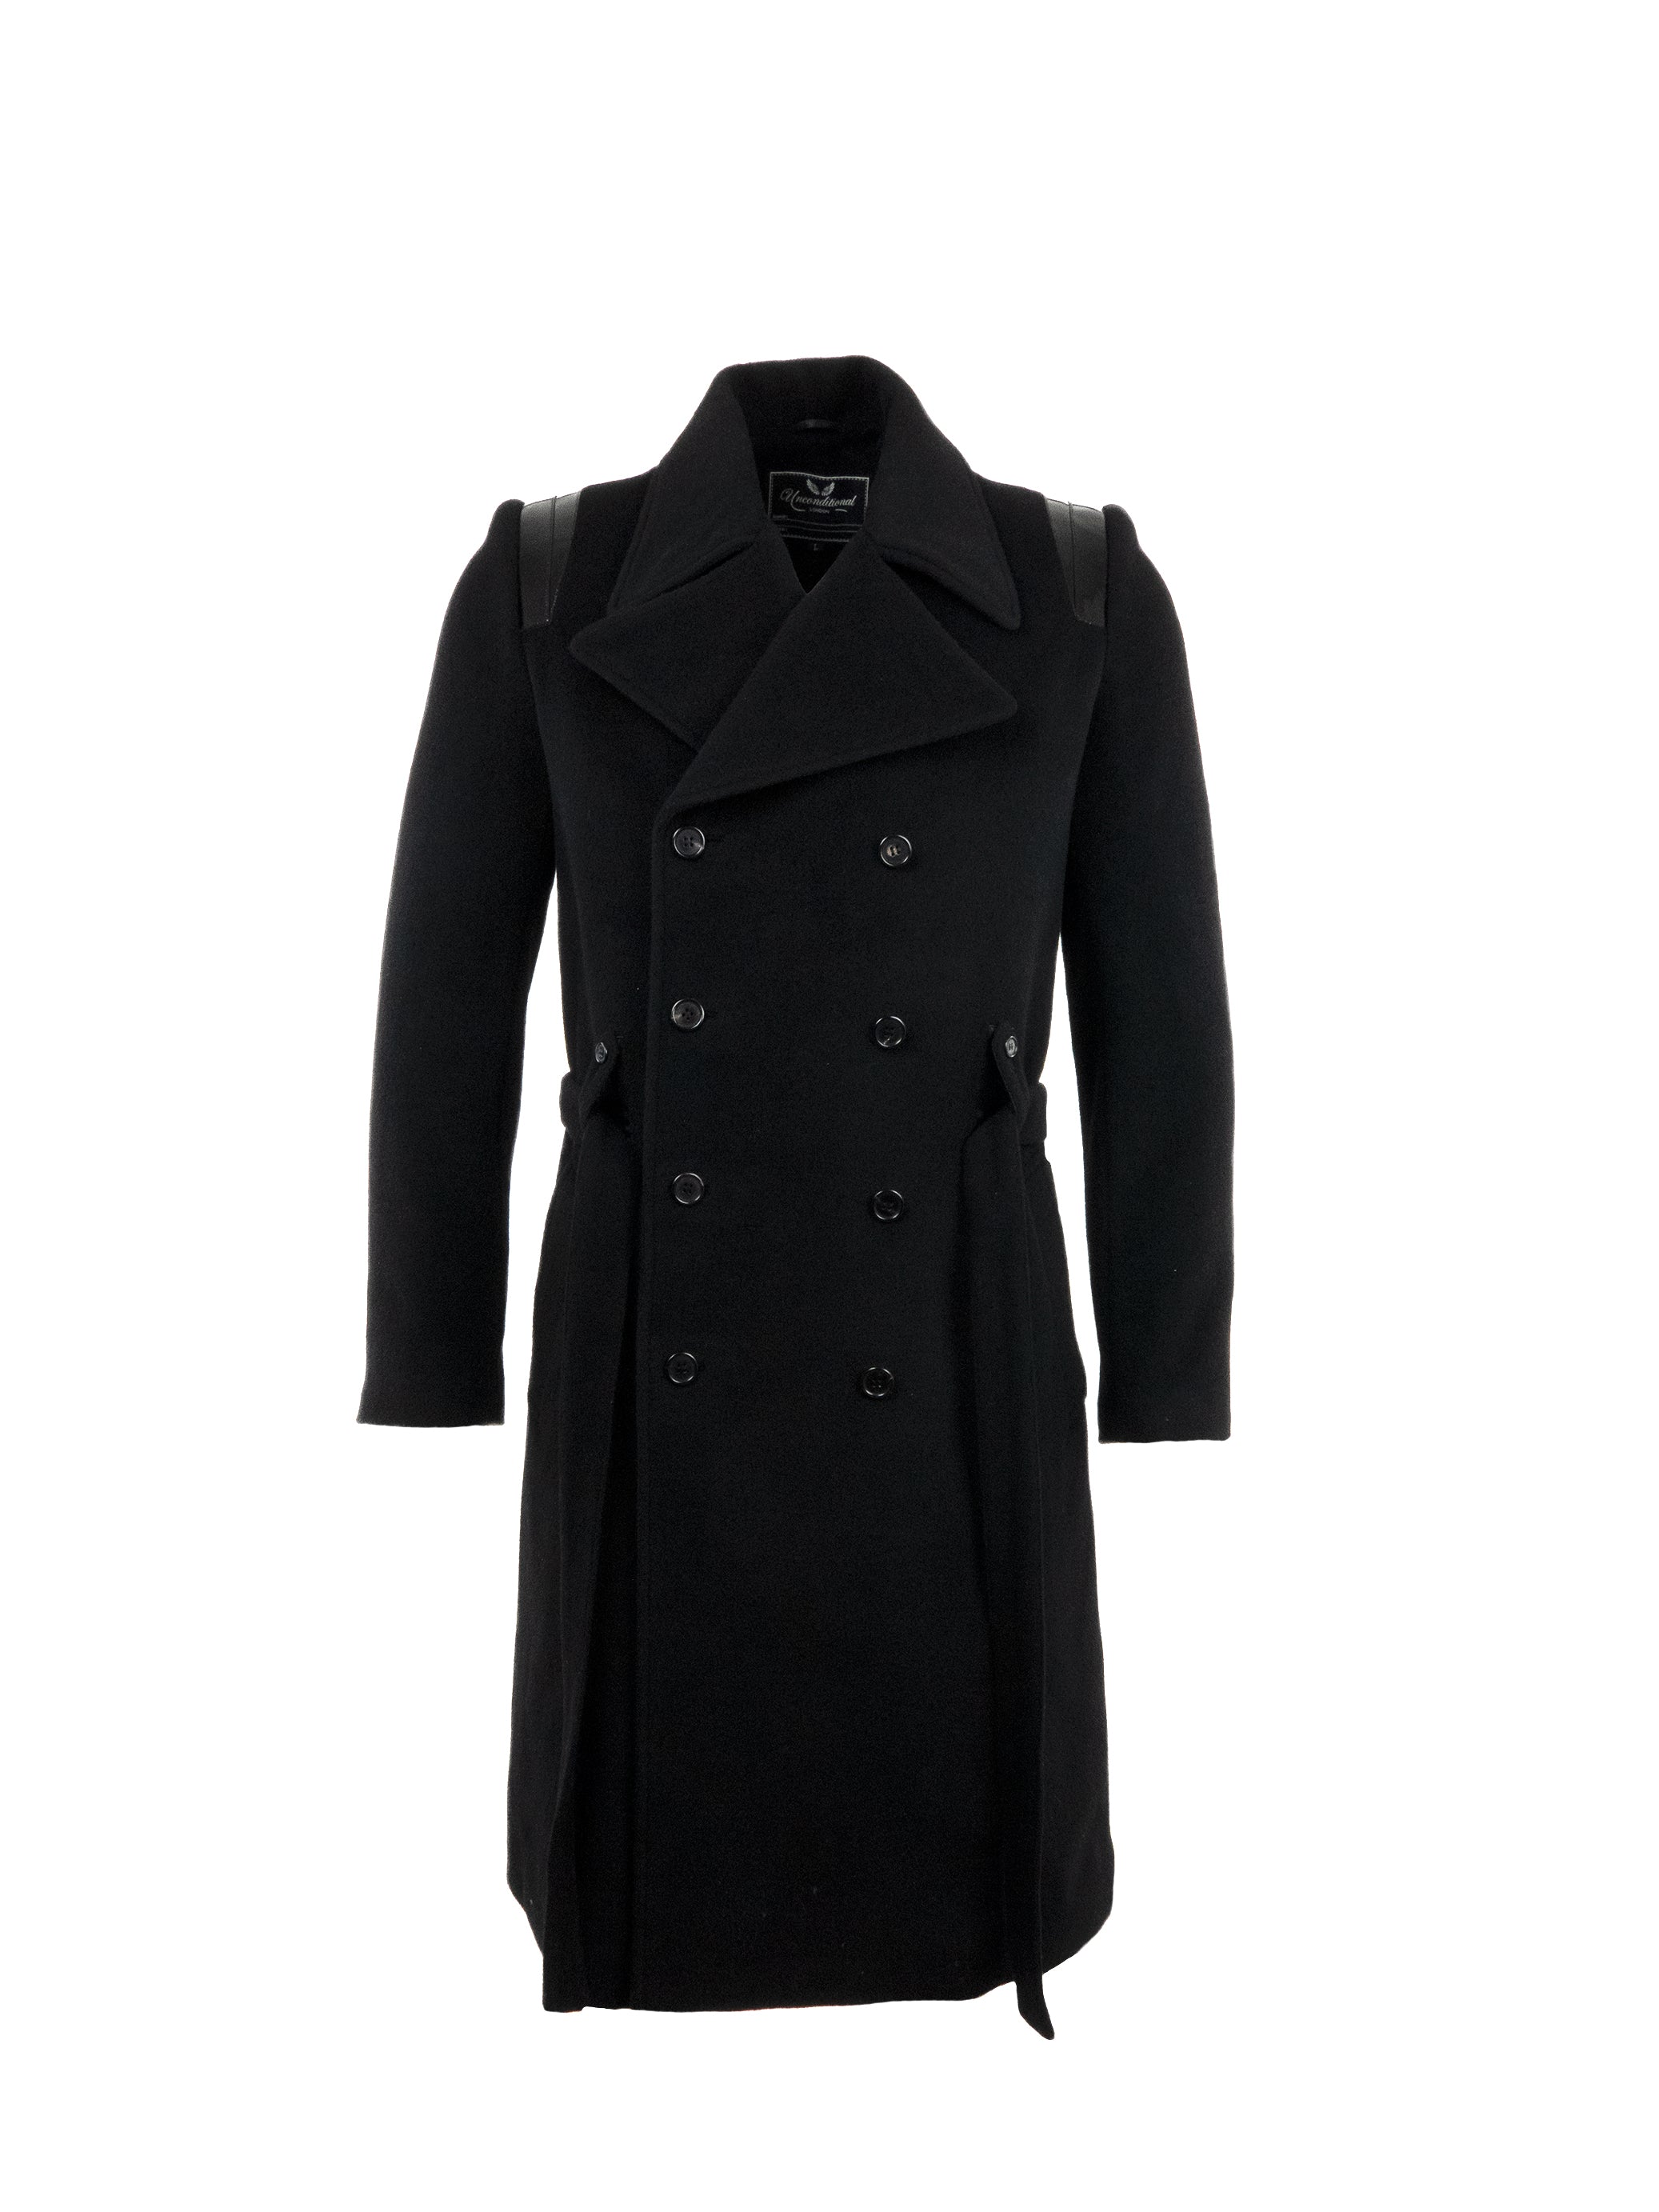 BLACK WOOL LONGLINE COAT WITH PATENT DETAILS